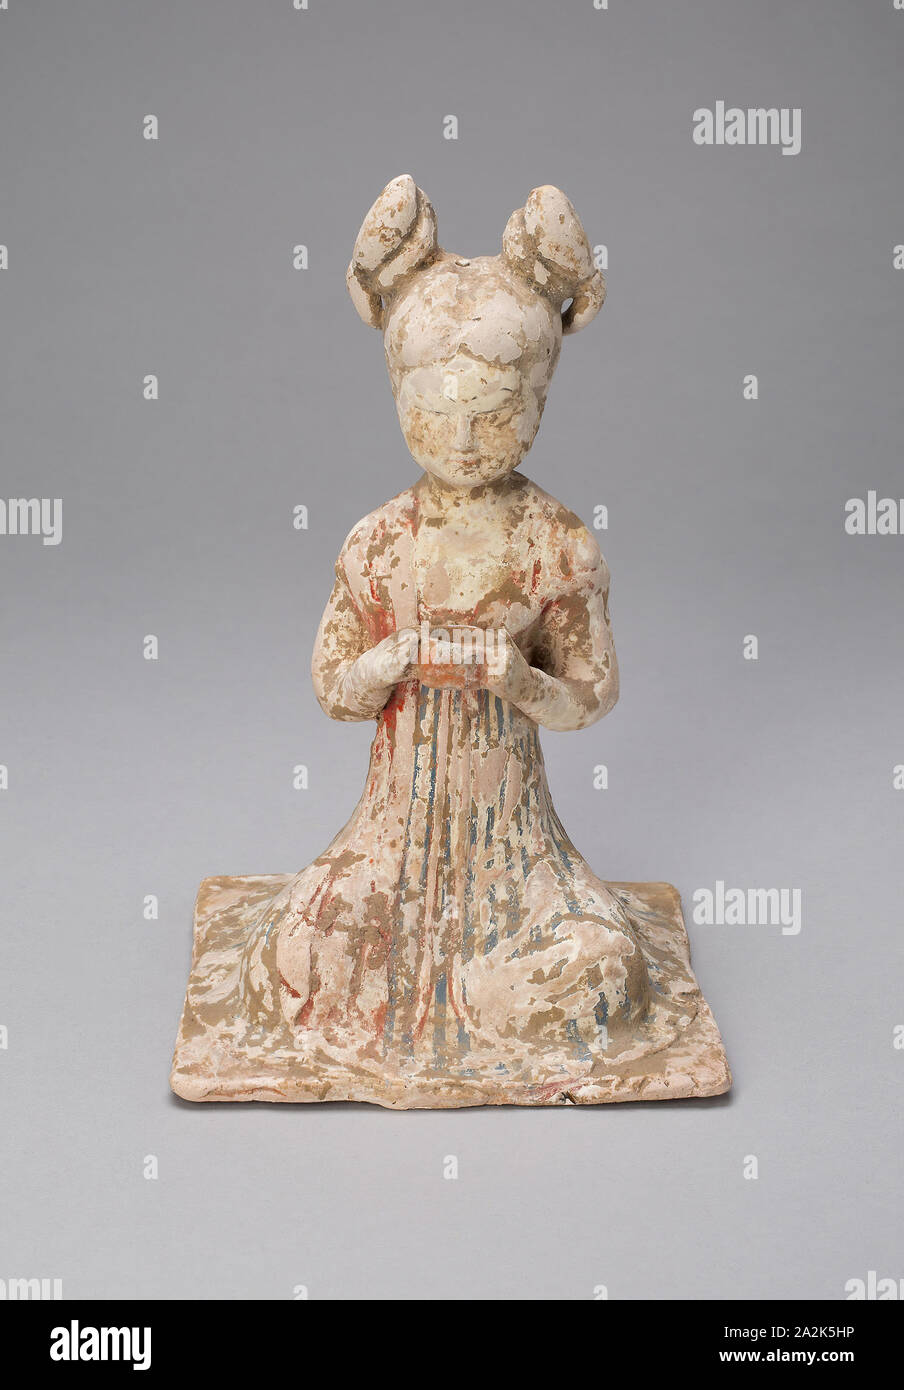 Female Musician, Tang dynasty (A.D. 618–907), late 7th/early 8th century, China, Earthenware with polychrome pigments, 20.6 × 13.3 × 12.8 cm (8 1/8 × 5 1/4 × 5 1/16 in Stock Photo